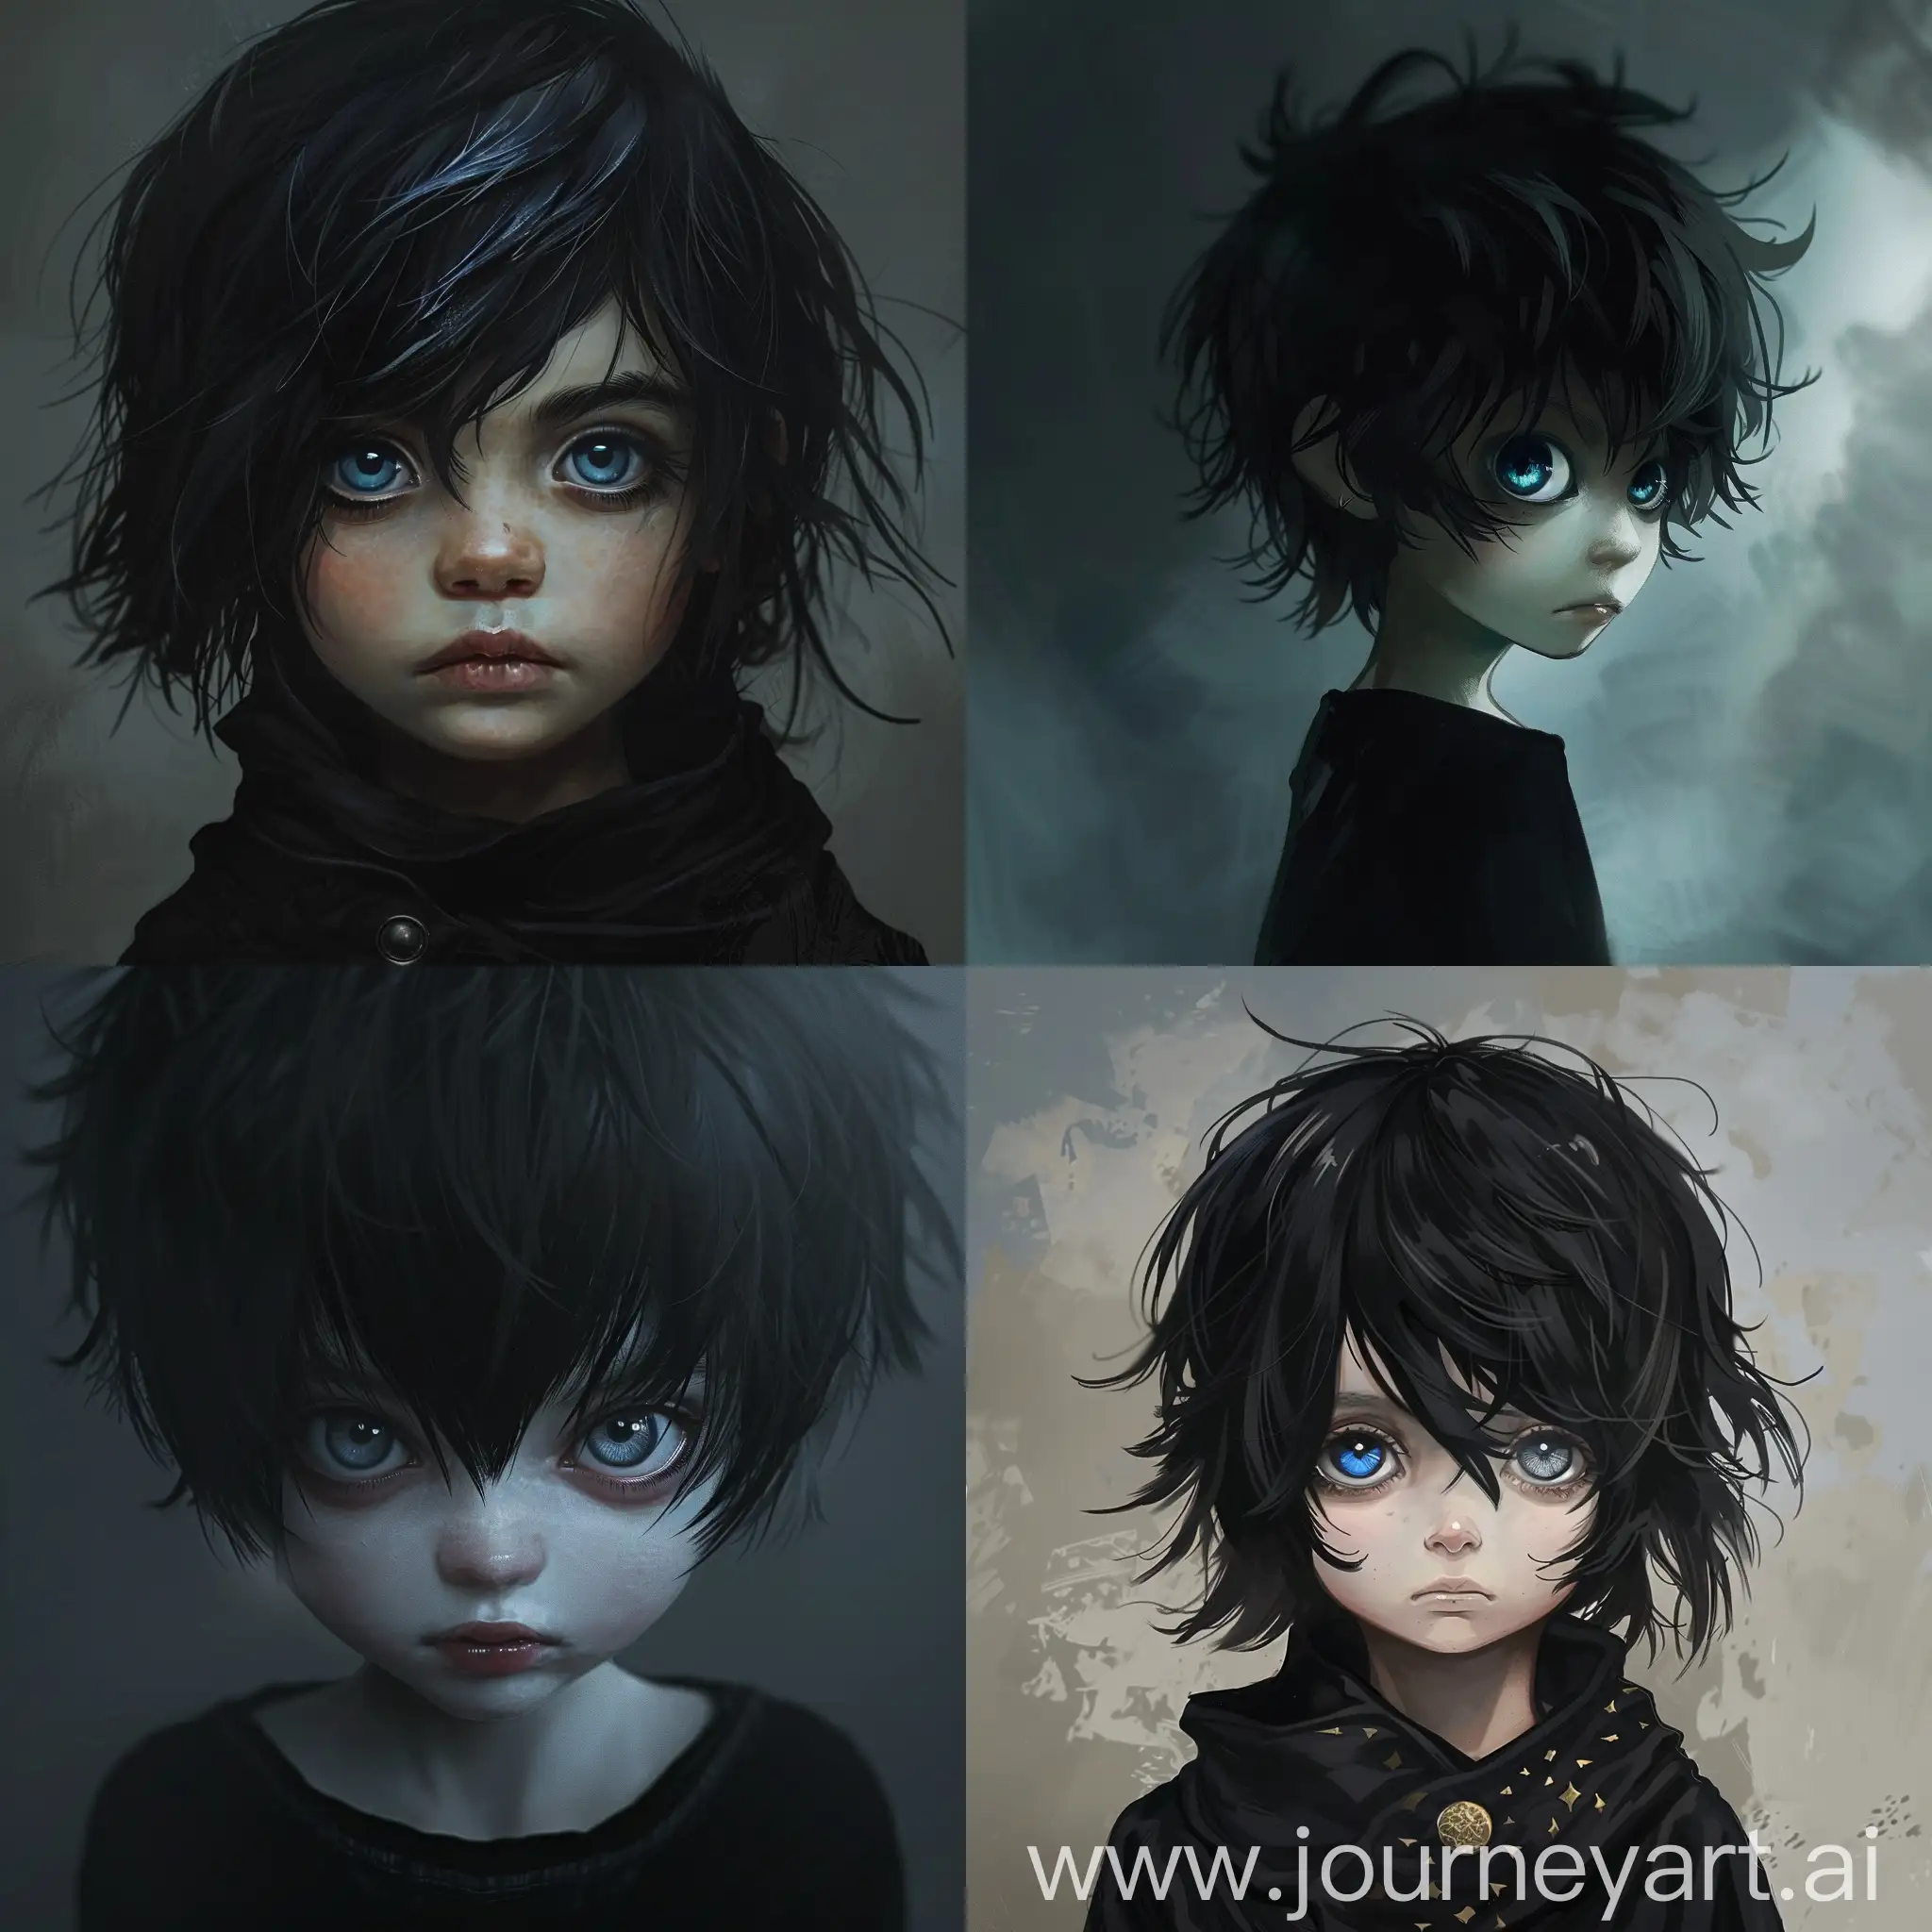 Young-Boy-in-Dark-Fantasy-World-BlueGrey-Eyed-Child-in-Mysterious-Realm